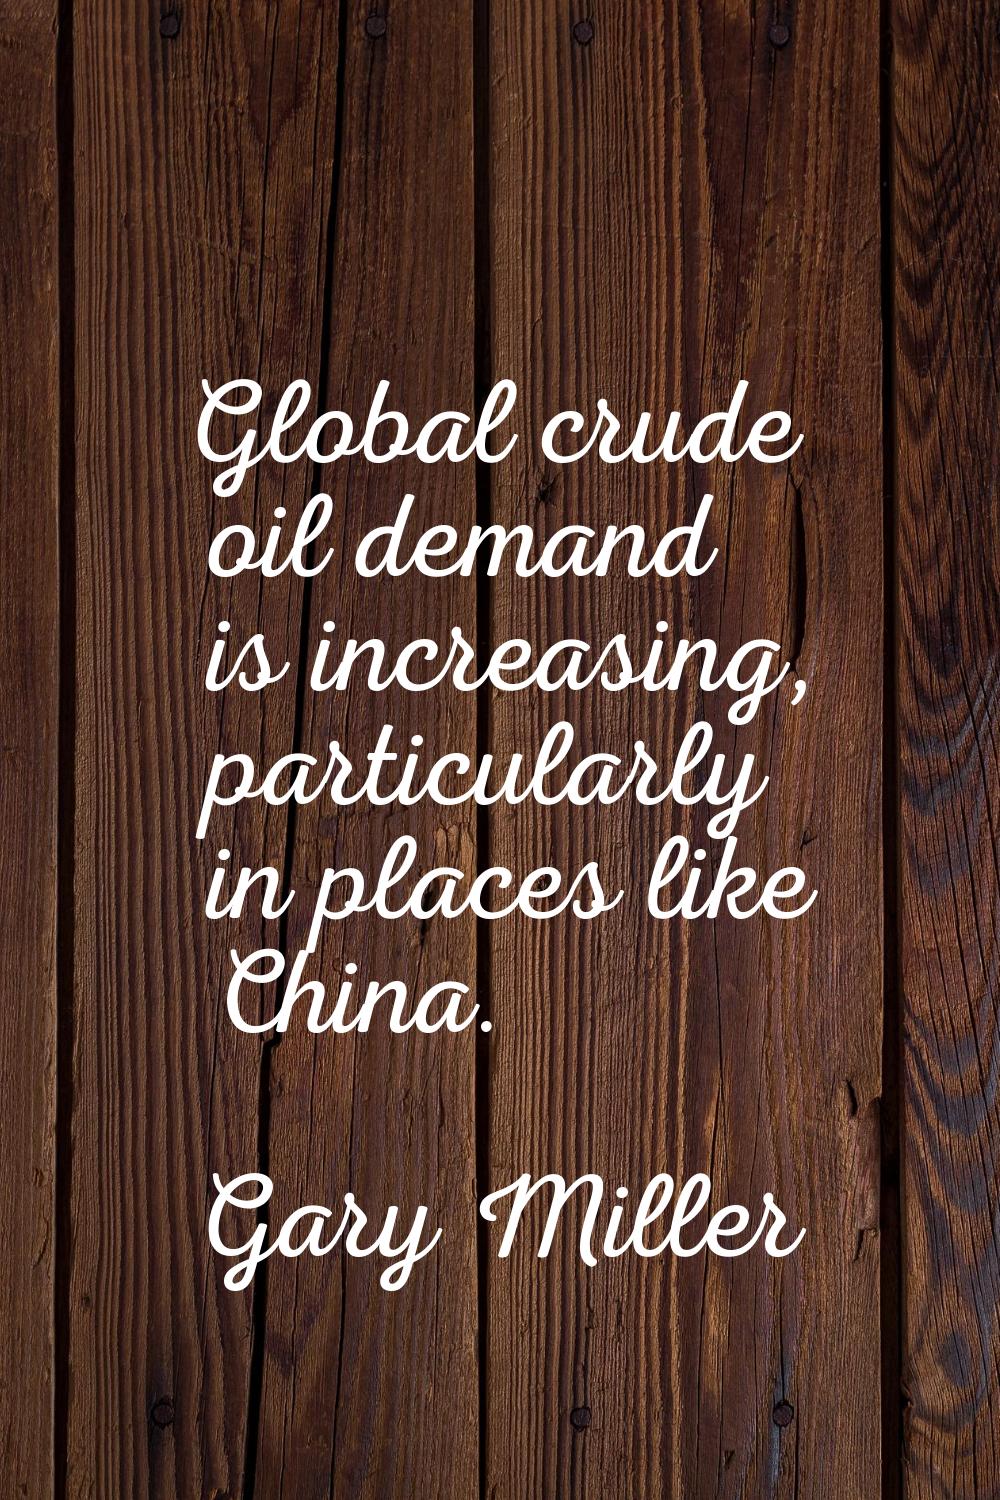 Global crude oil demand is increasing, particularly in places like China.